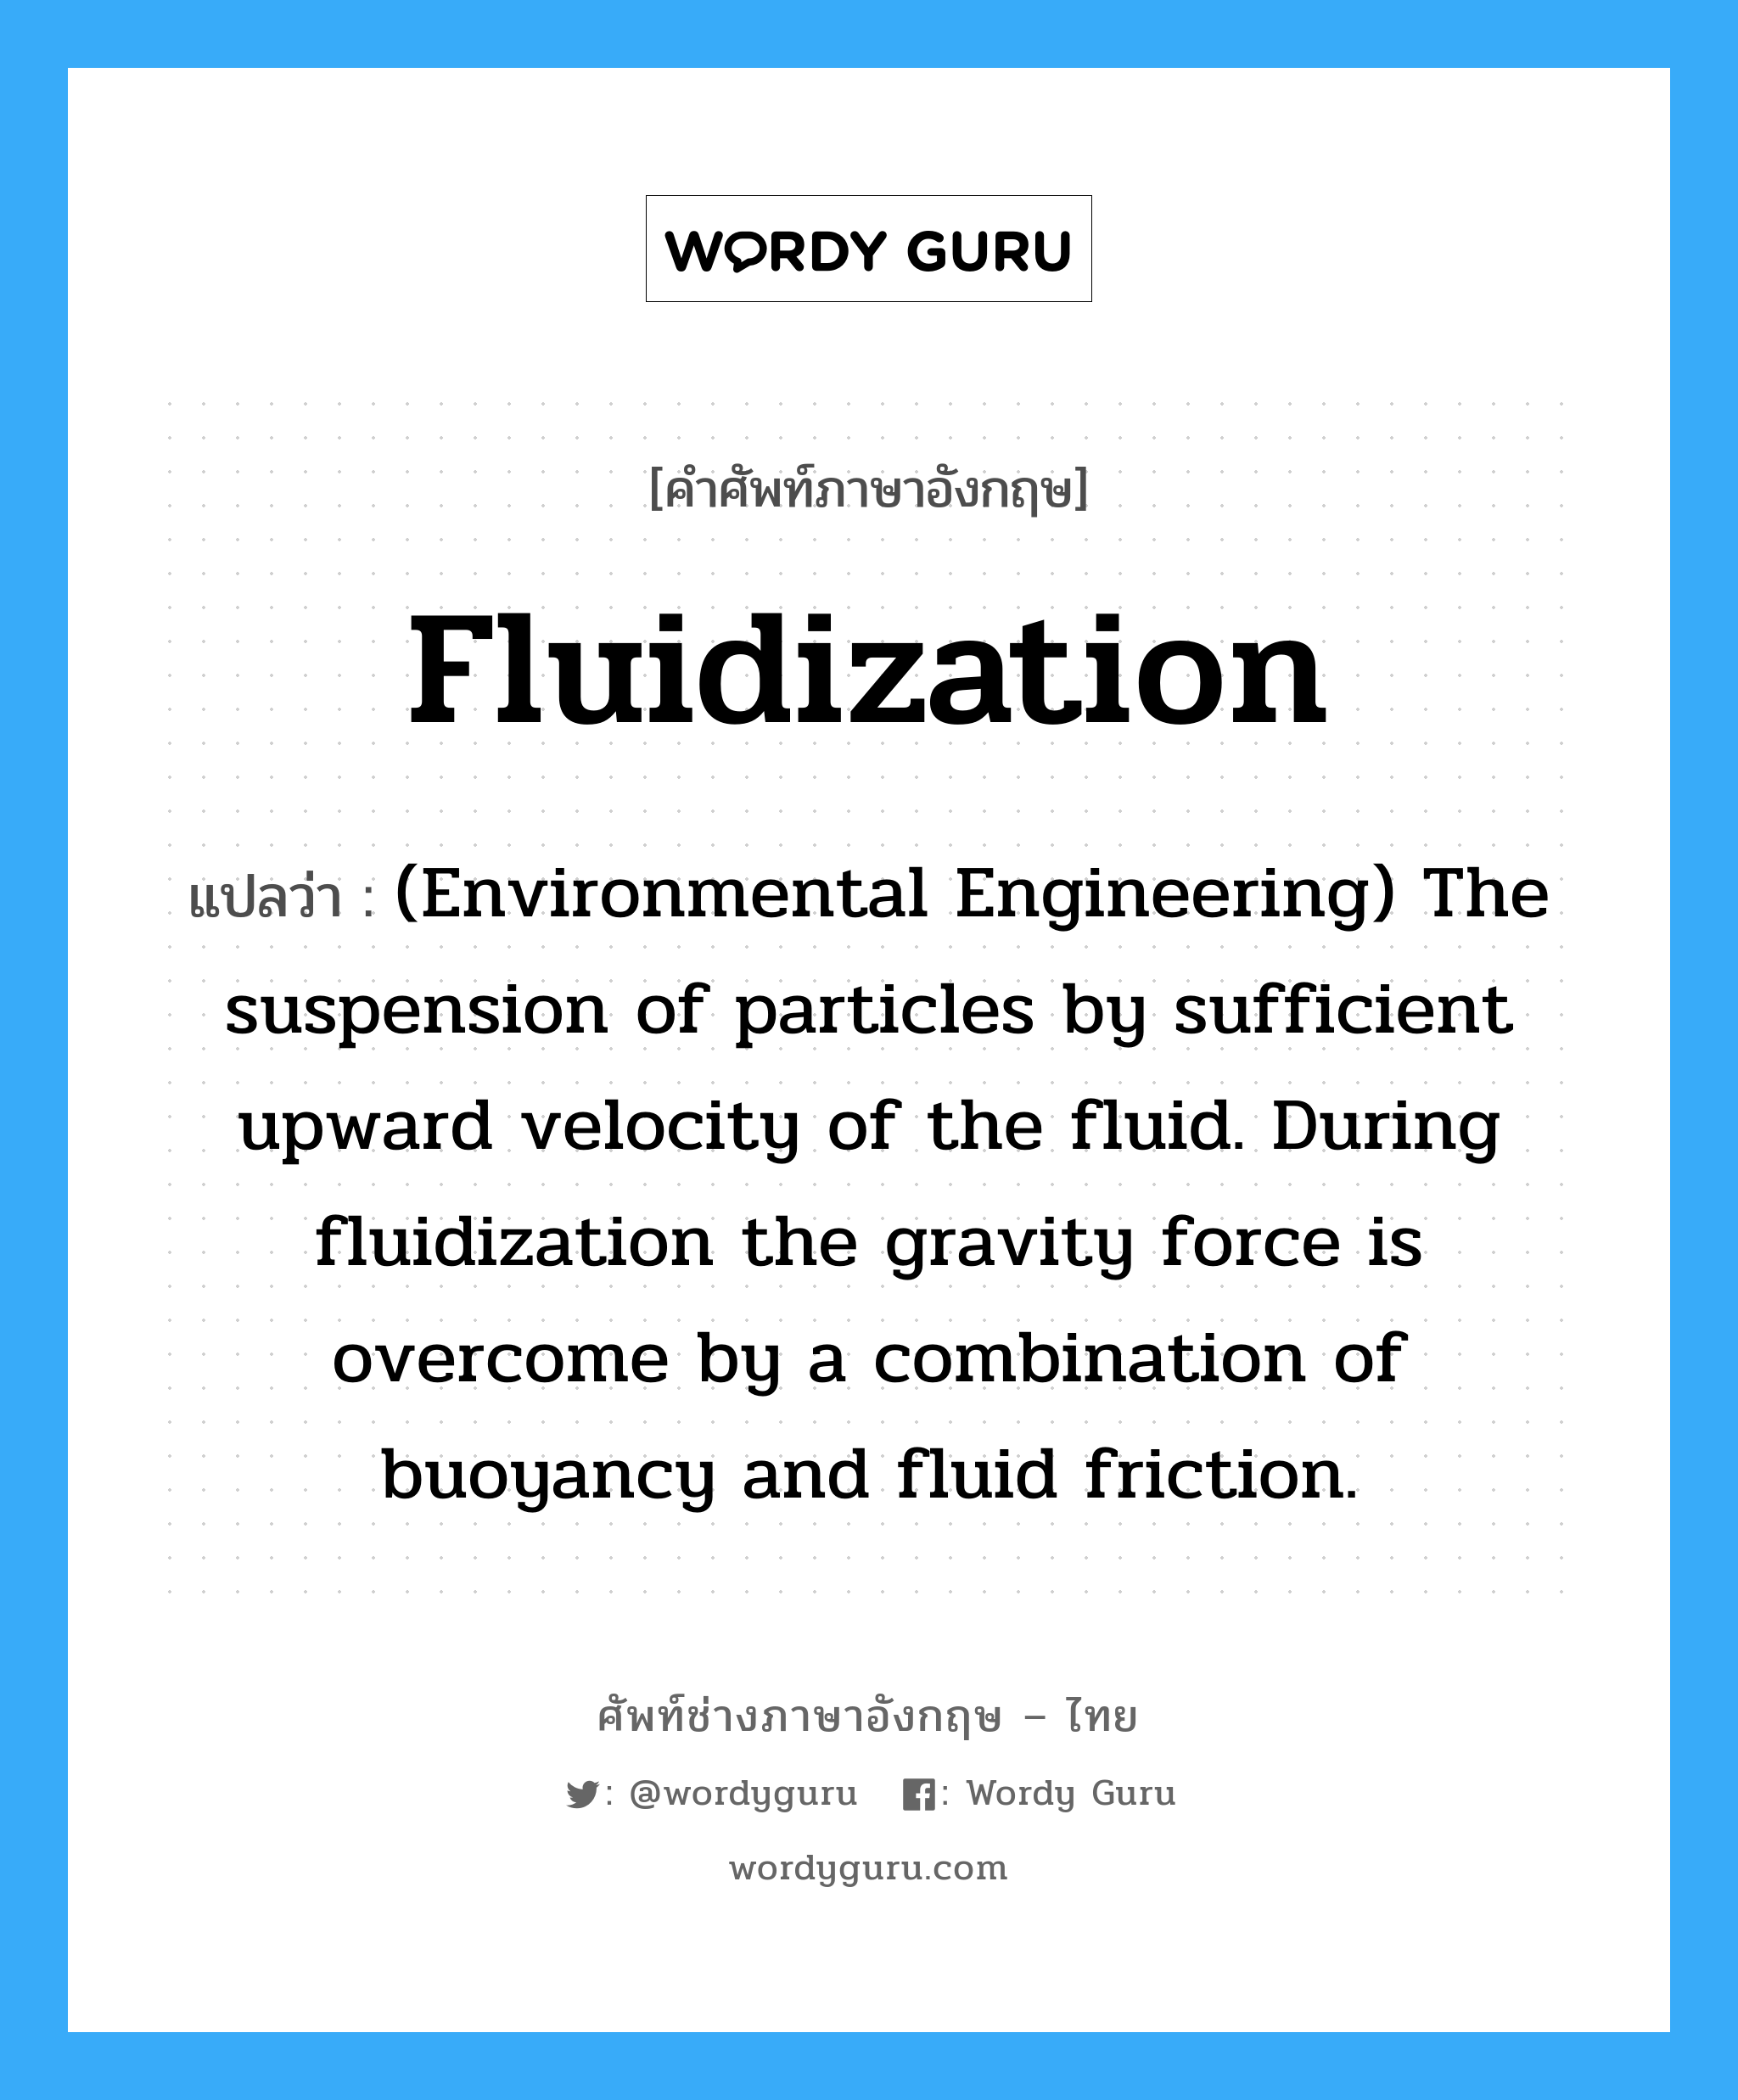 (Environmental Engineering) The suspension of particles by sufficient upward velocity of the fluid. During fluidization the gravity force is overcome by a combination of buoyancy and fluid friction. ภาษาอังกฤษ?, คำศัพท์ช่างภาษาอังกฤษ - ไทย (Environmental Engineering) The suspension of particles by sufficient upward velocity of the fluid. During fluidization the gravity force is overcome by a combination of buoyancy and fluid friction. คำศัพท์ภาษาอังกฤษ (Environmental Engineering) The suspension of particles by sufficient upward velocity of the fluid. During fluidization the gravity force is overcome by a combination of buoyancy and fluid friction. แปลว่า Fluidization